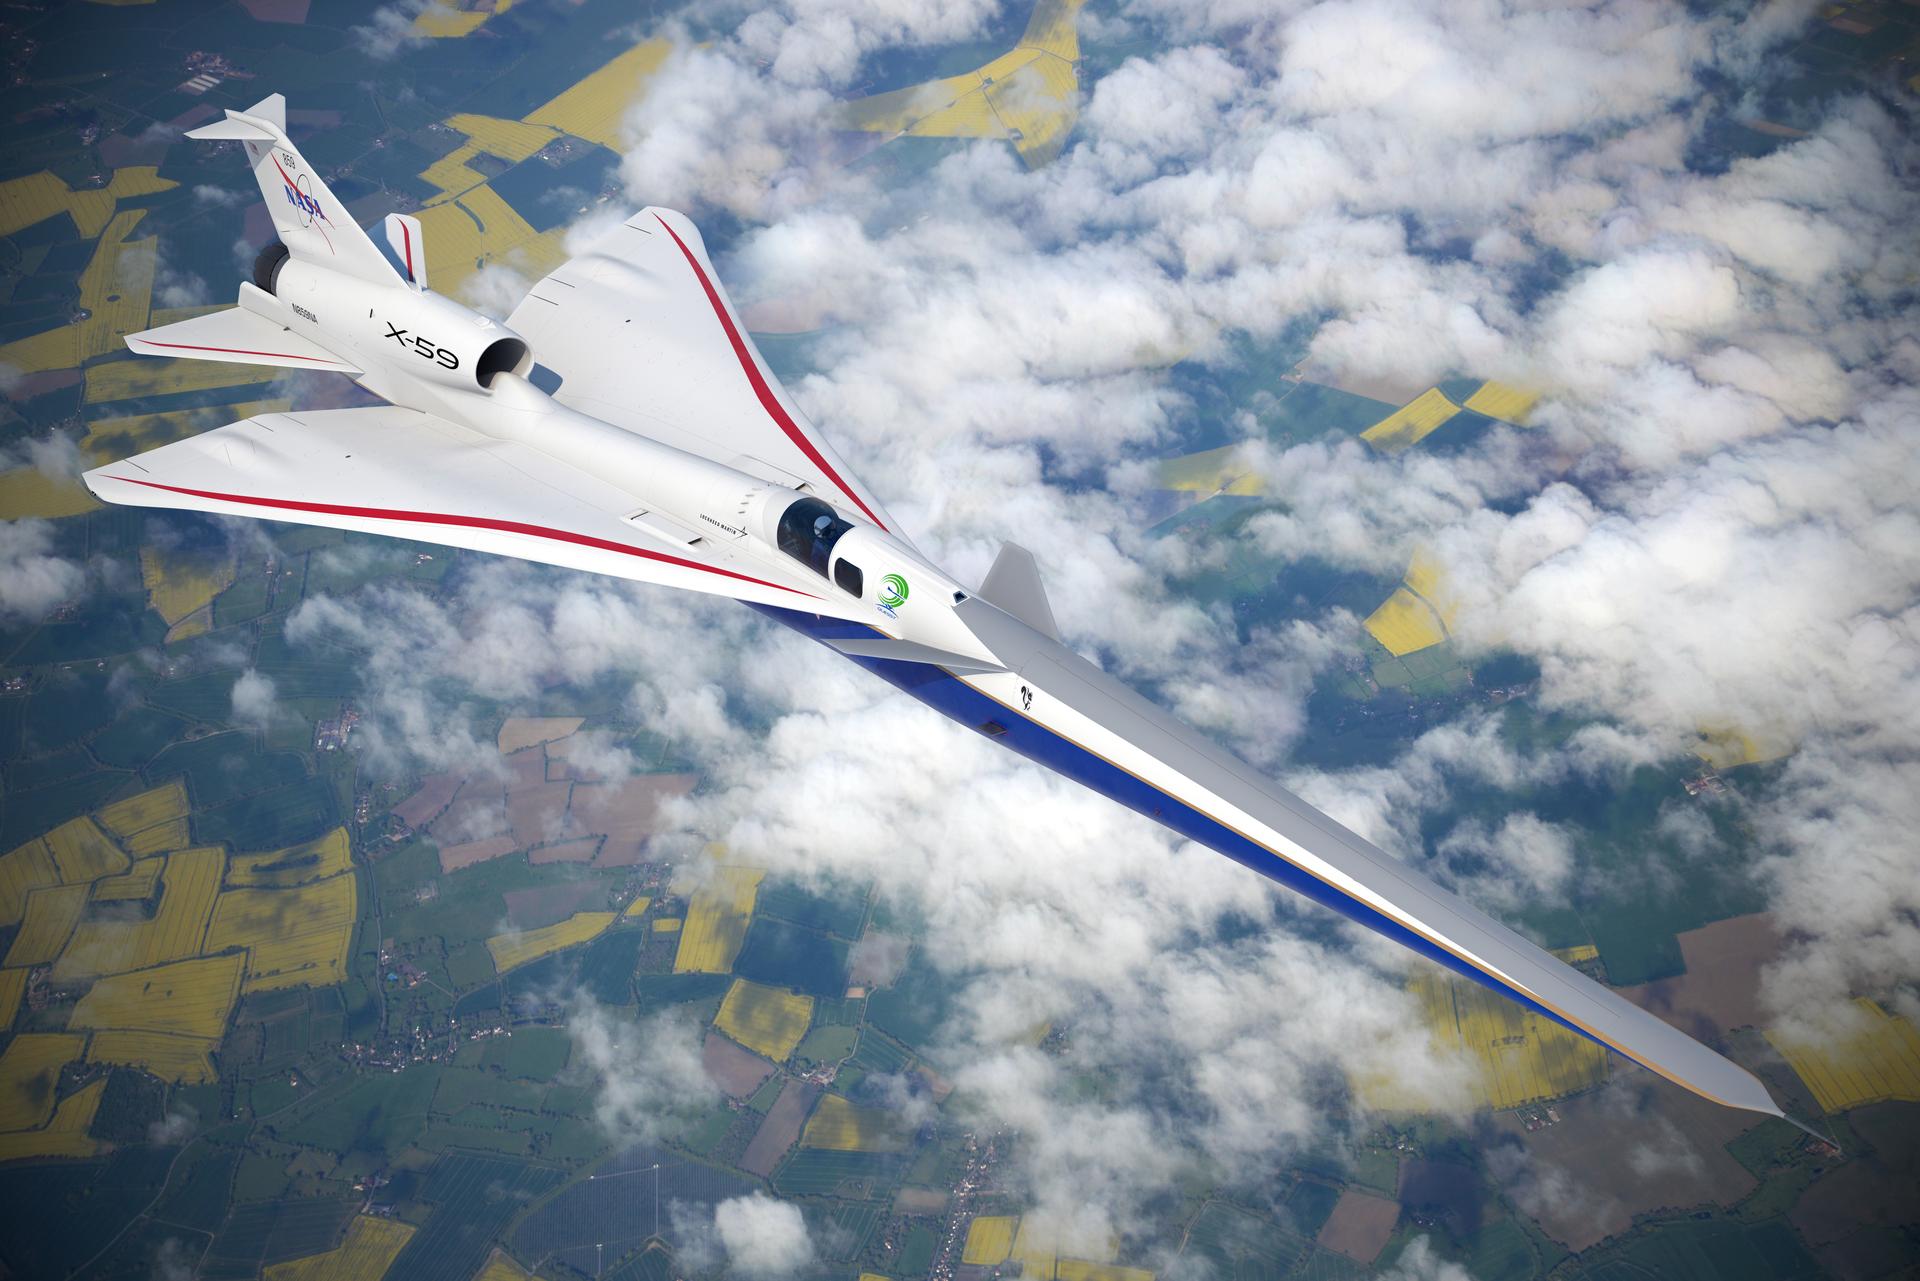 PICTURE OF ARTIST CONCEPT OF NASA'S X-59 SUPERSONIC AIRCRAFT .